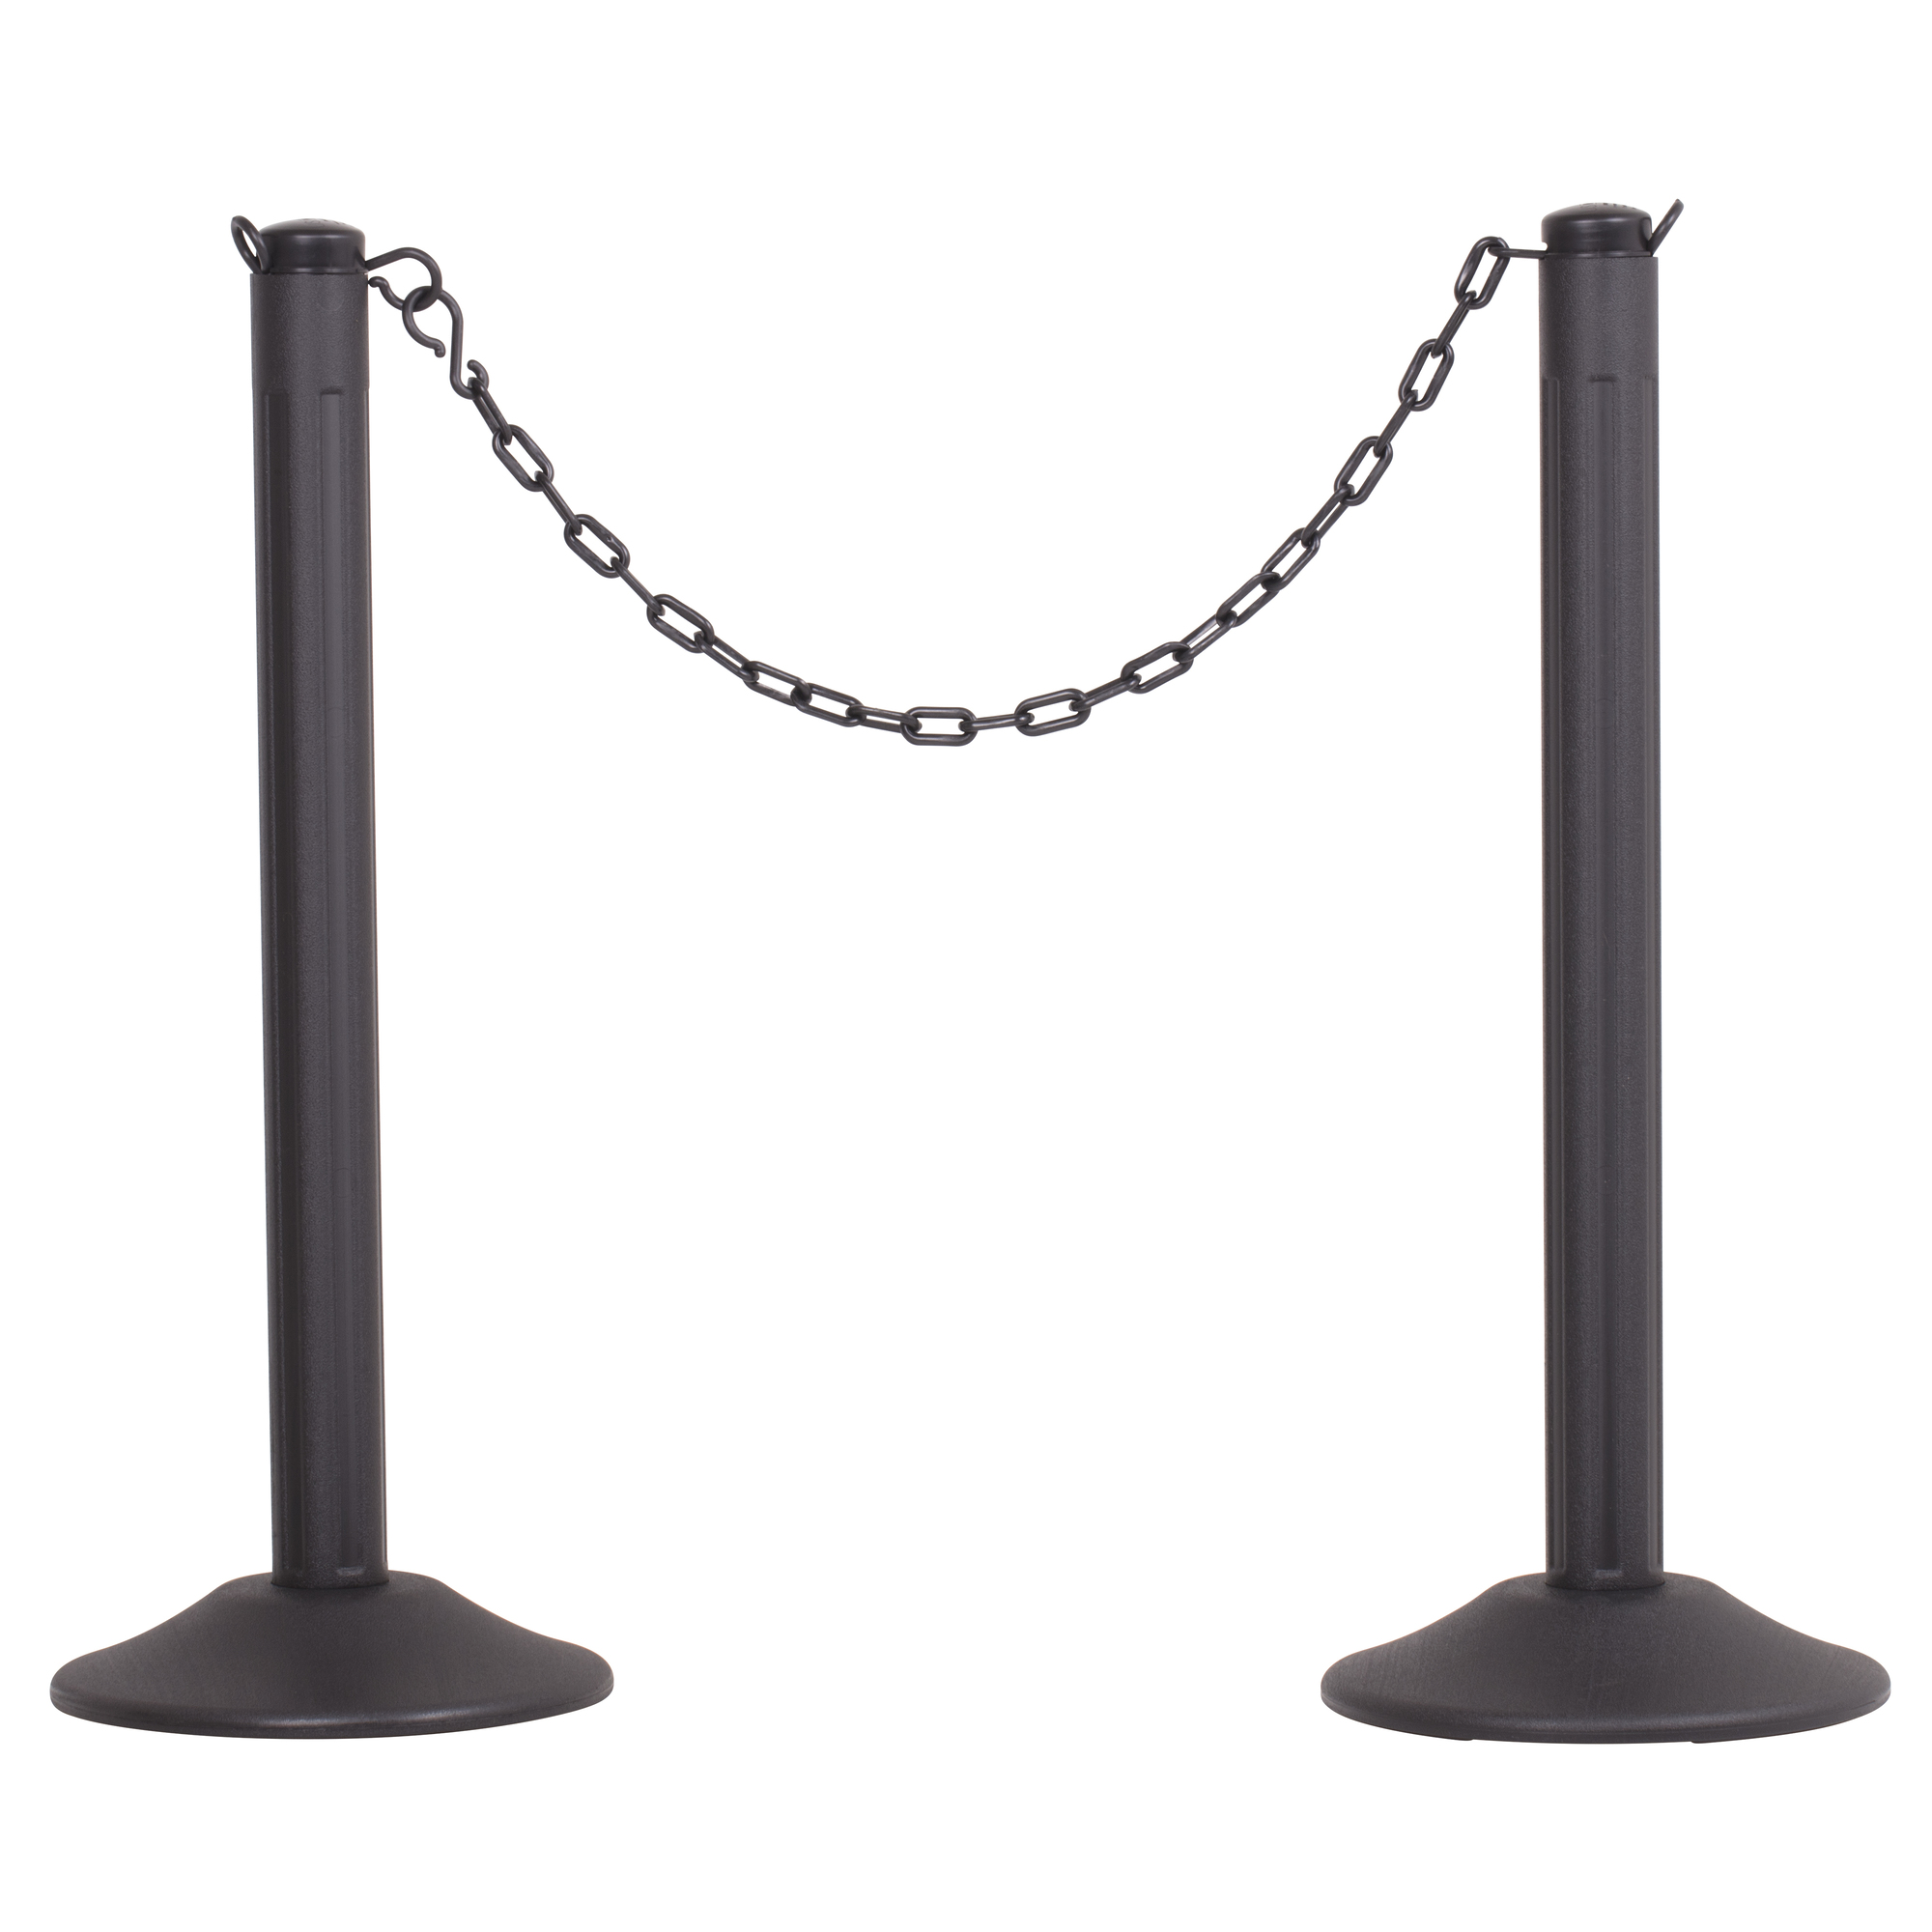 US Weight, Black post w 2Inch Black chain weighted 2pk, Model U2006